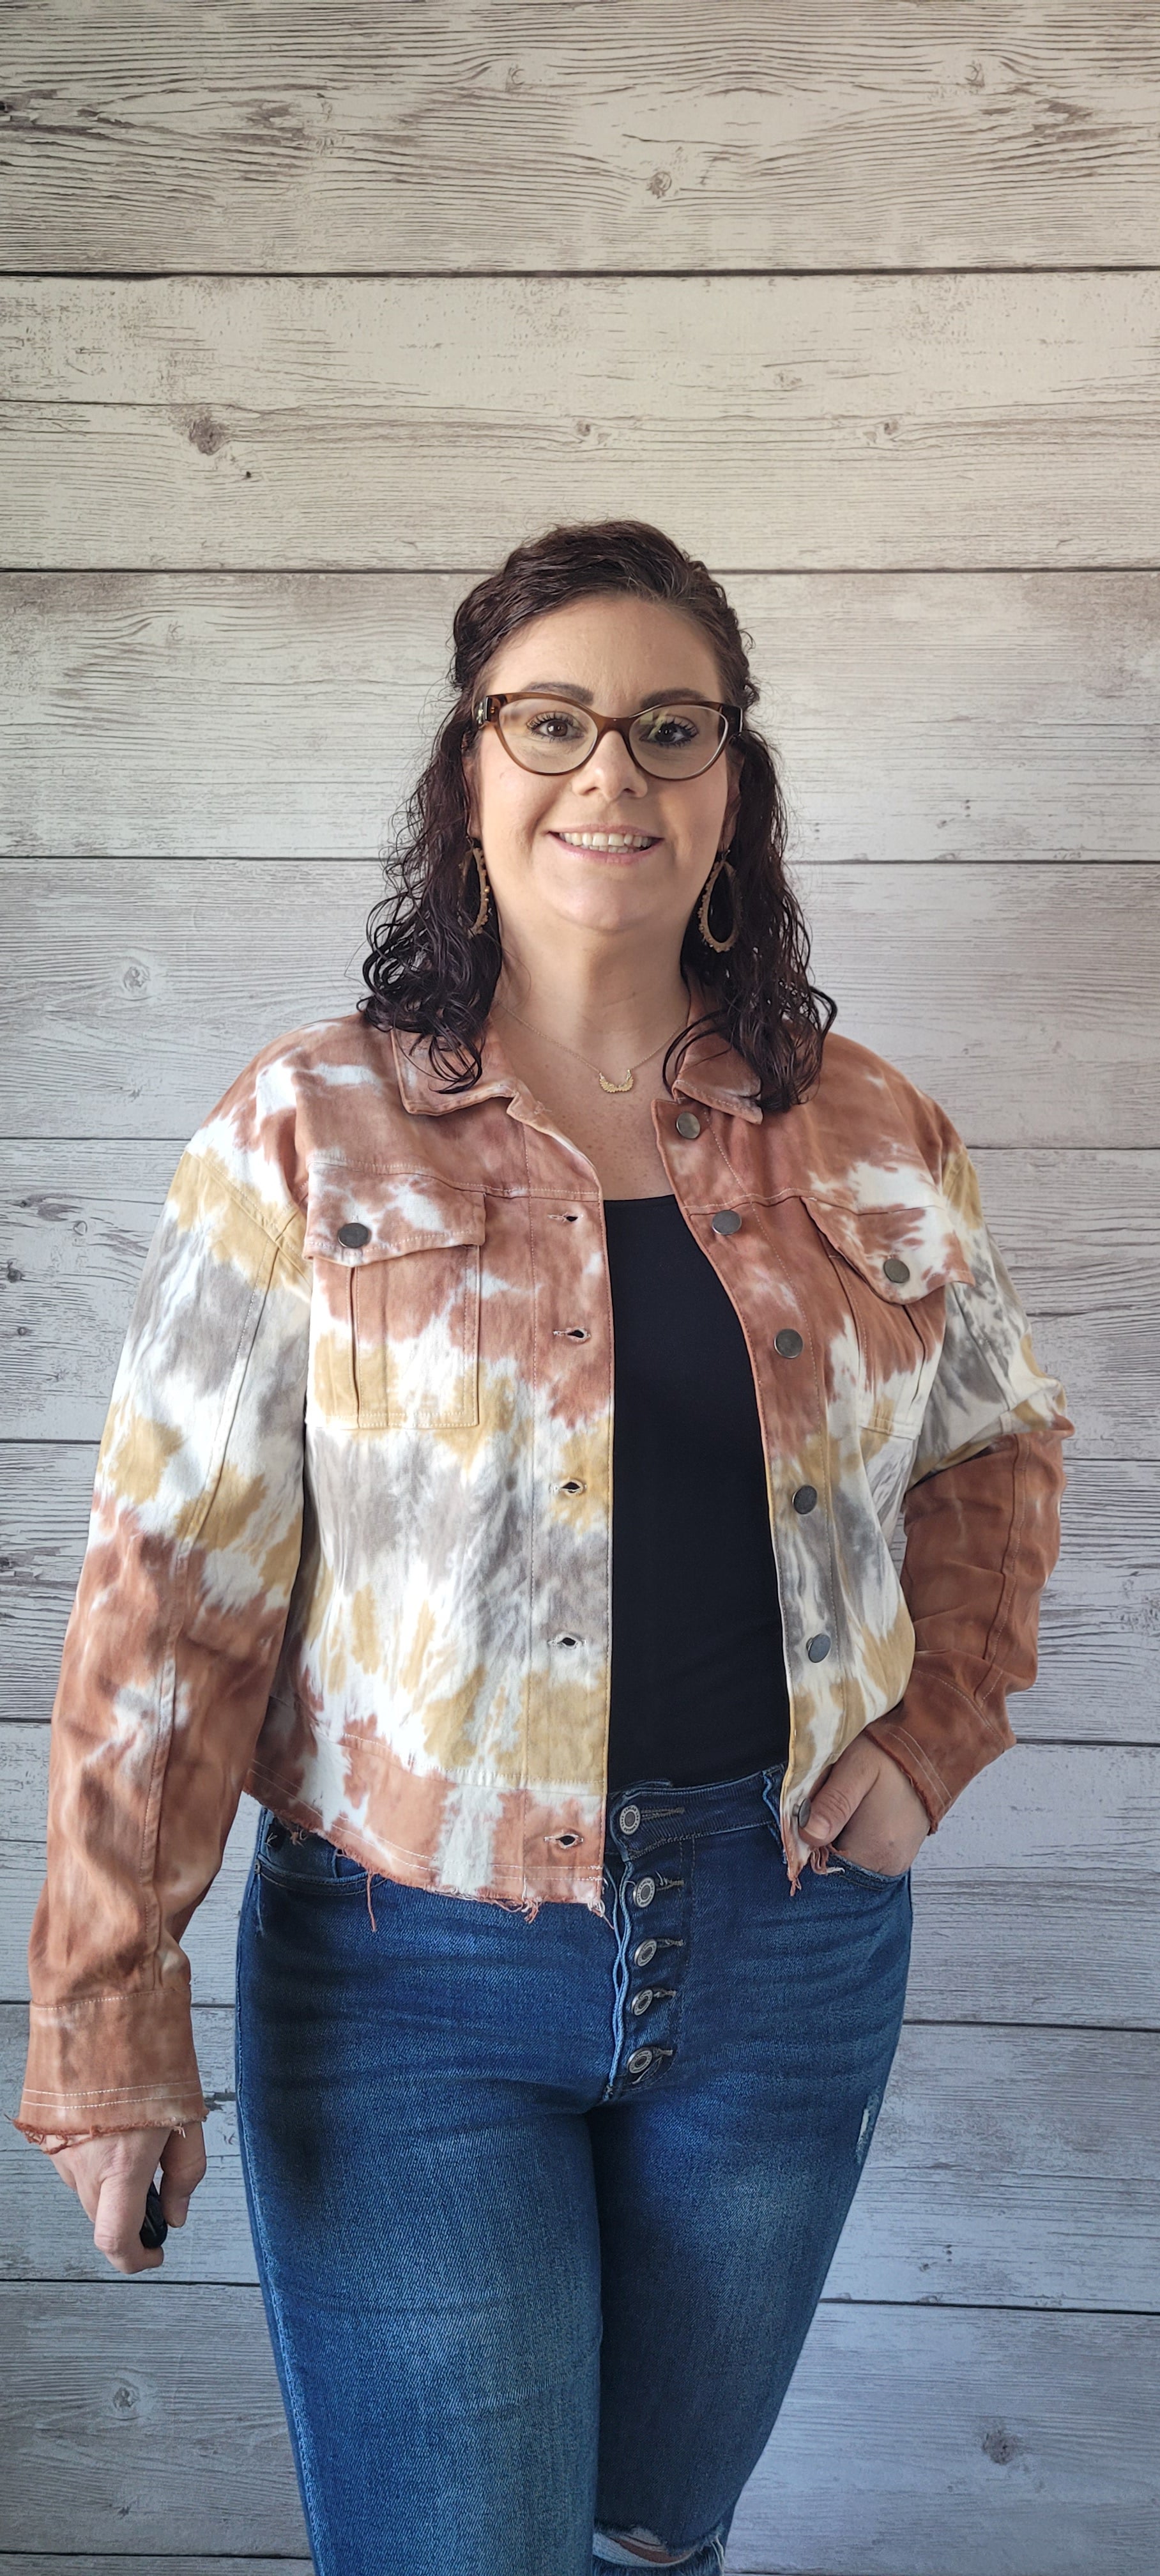 Make a statement with this adorable terracotta tie dye trucker jacket! Enjoy the unique style of this timeless piece featuring metal button closure, bust flap pockets, and distressed hem and cuff edges. Wearing this piece is sure to cause a stir; try it and let the compliments roll in! Sizes small through large.